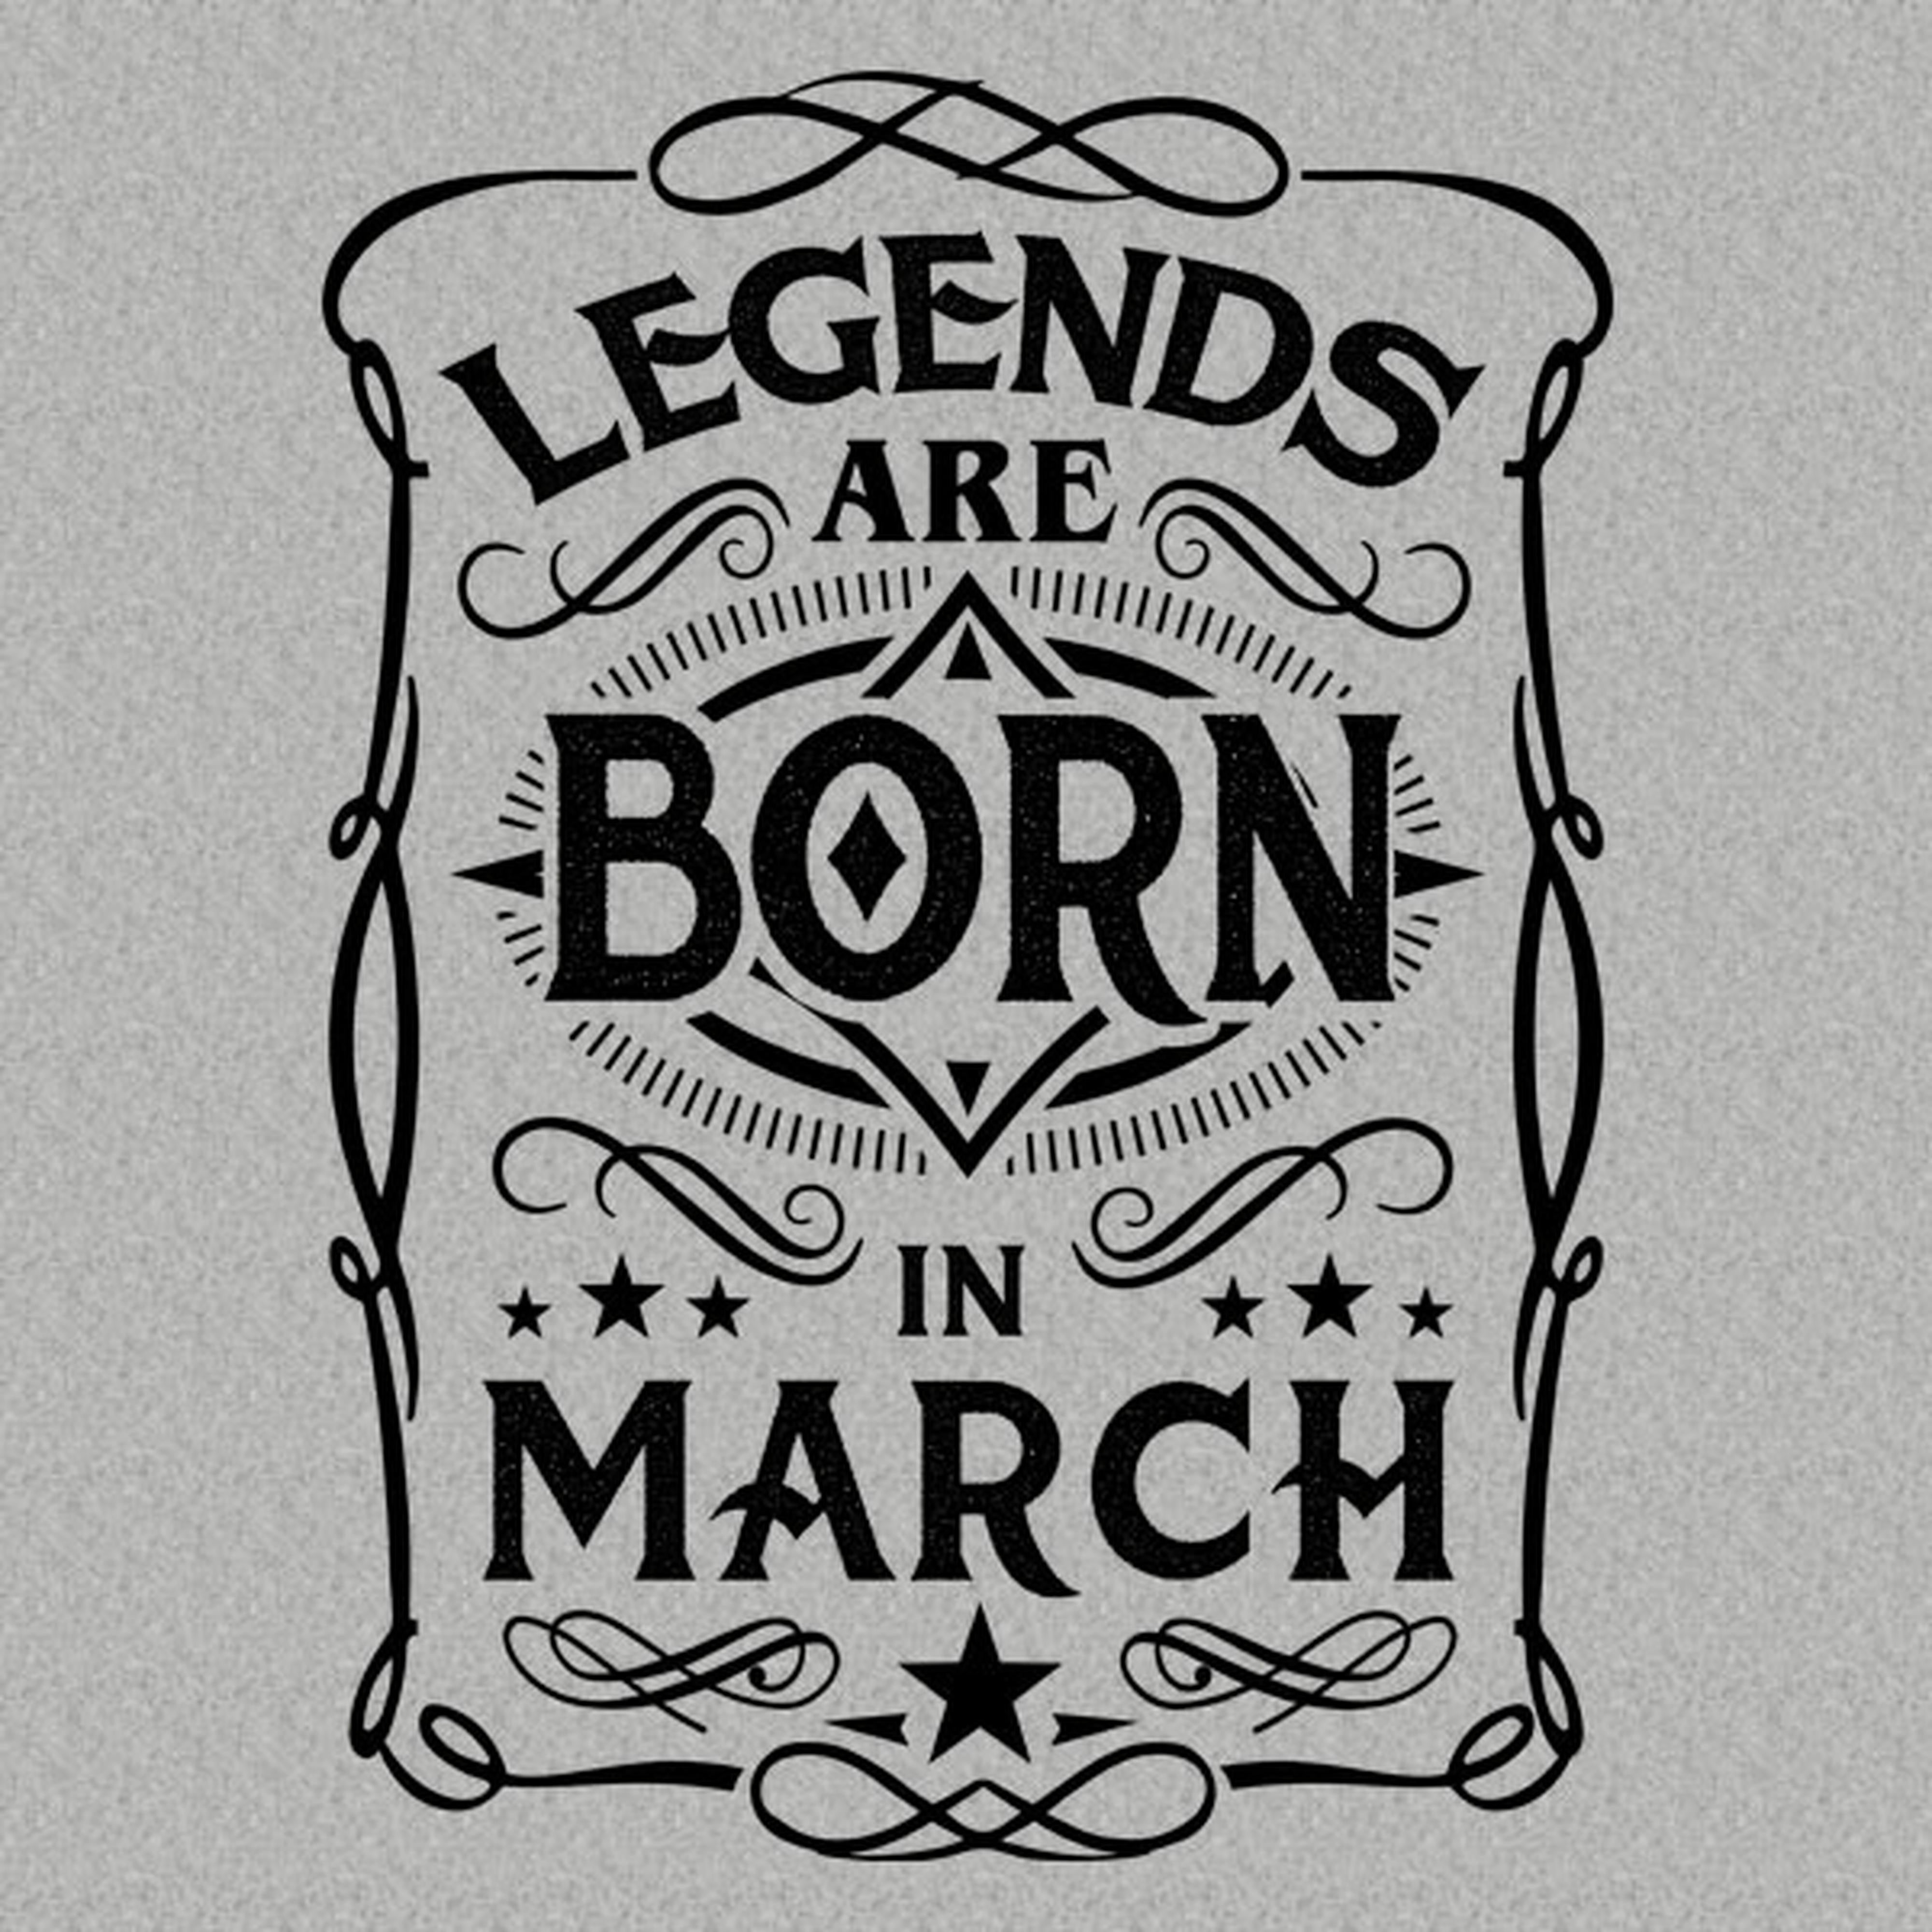 Legends are born in March - T-shirt